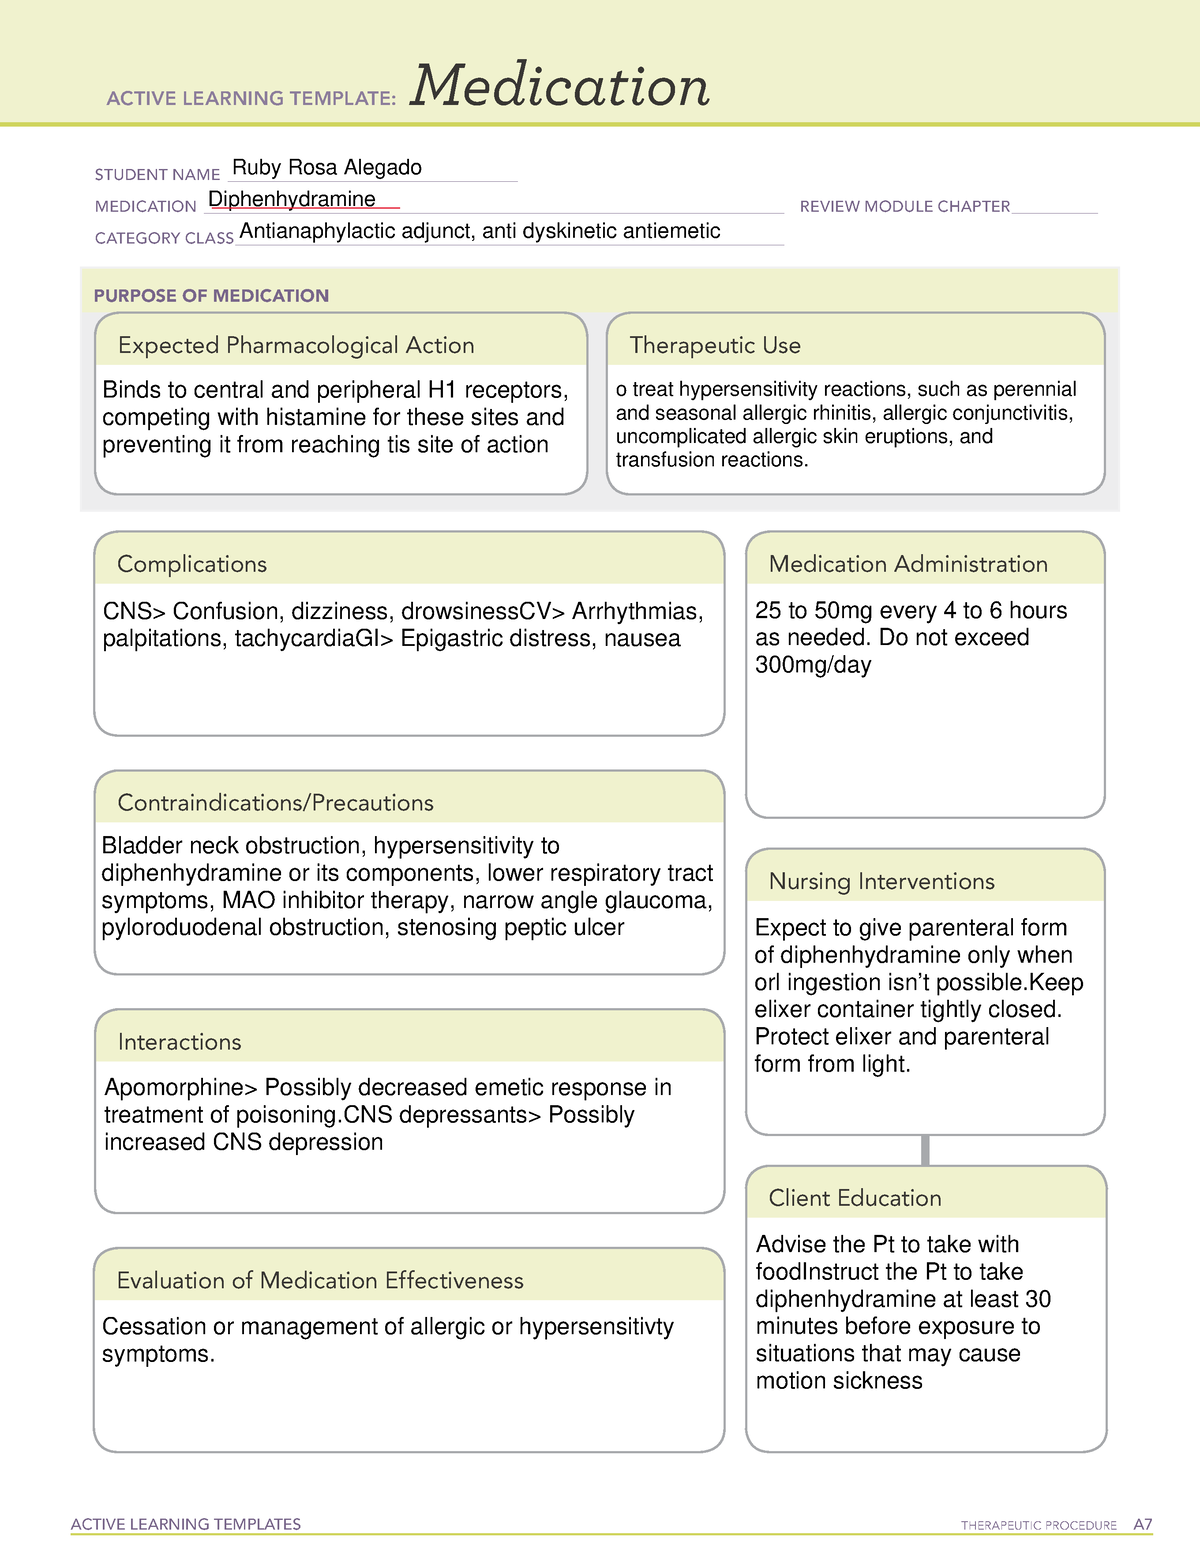 Diphenhydramine medication template ACTIVE LEARNING TEMPLATES